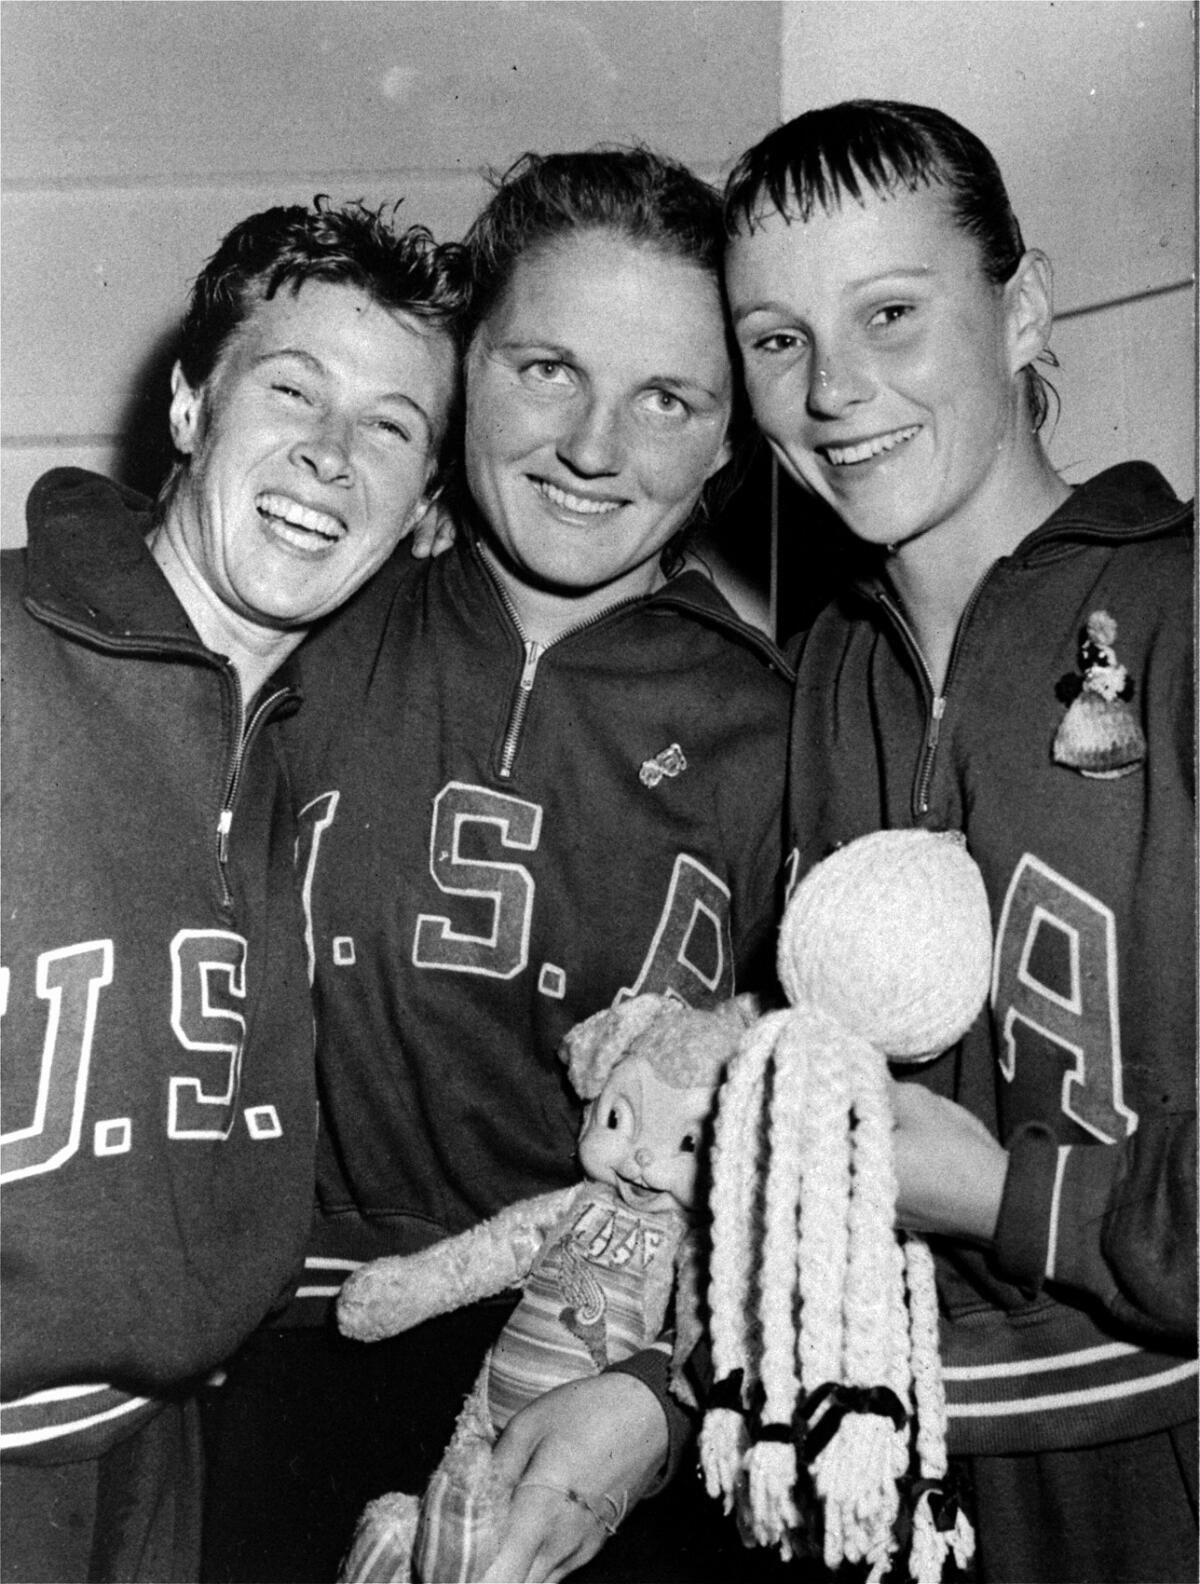 Pat McCormick, center, celebrates with Americans Juno Irwin and Paula Myers after winning diving gold.